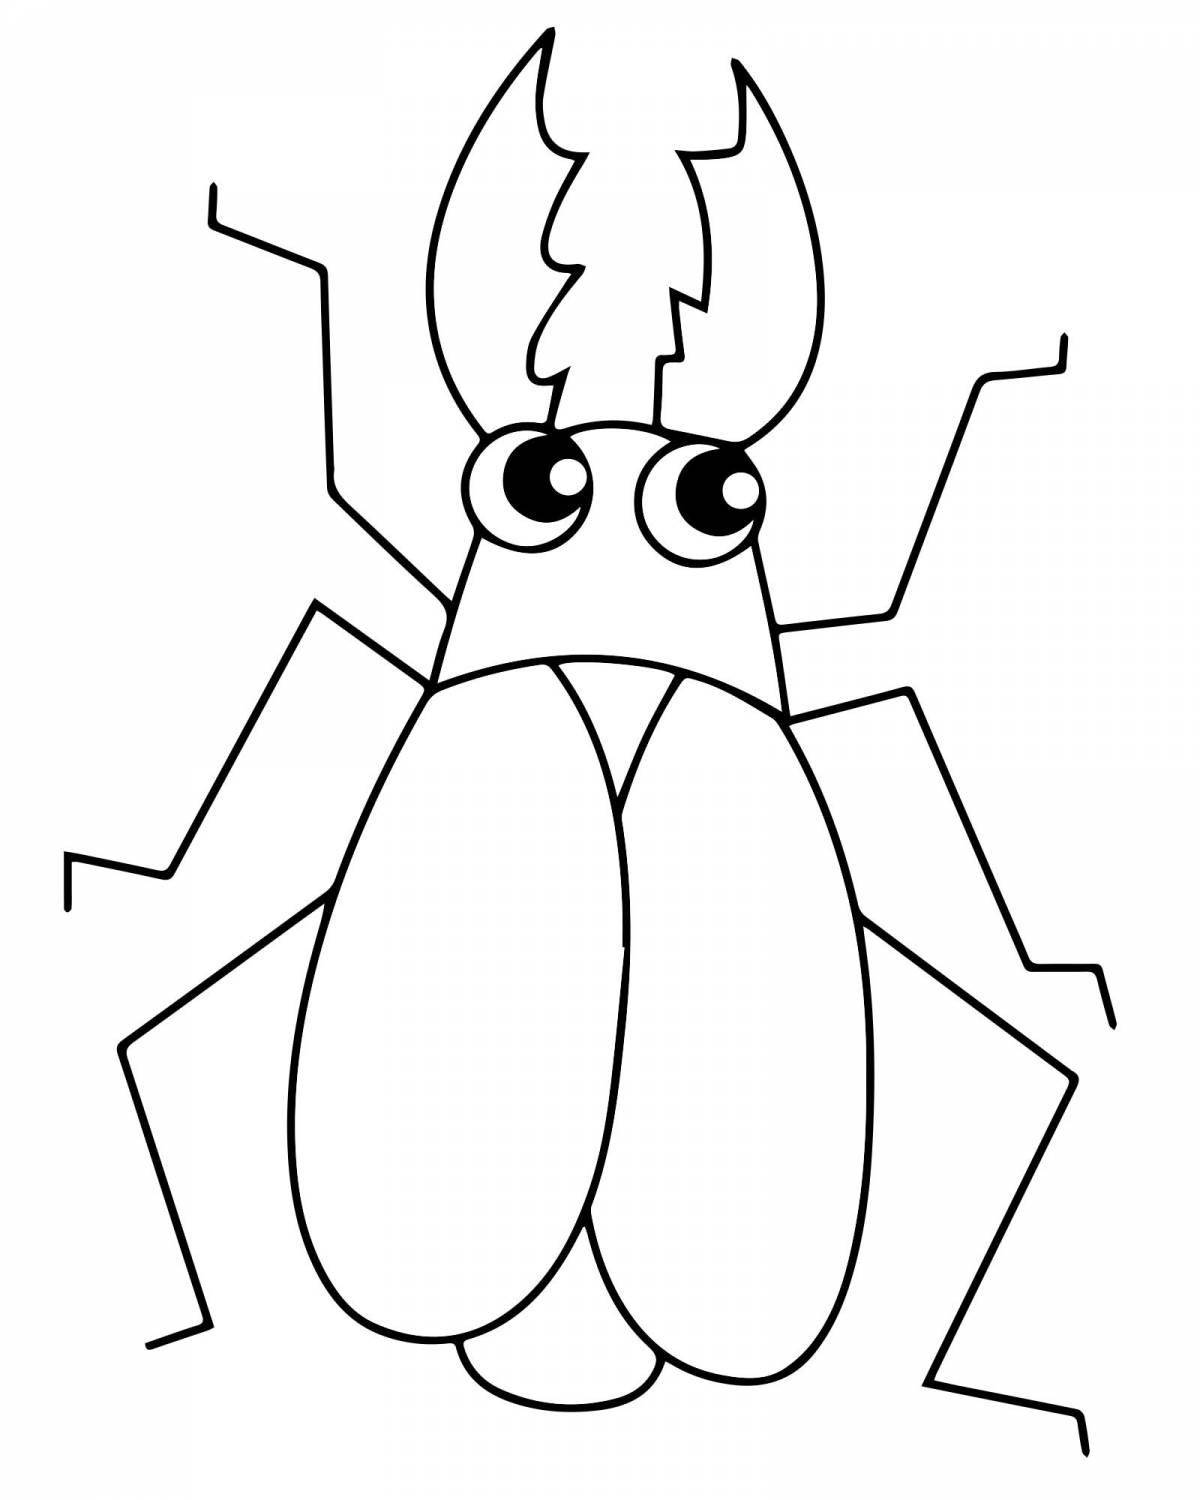 Glitter beetle coloring book for kids